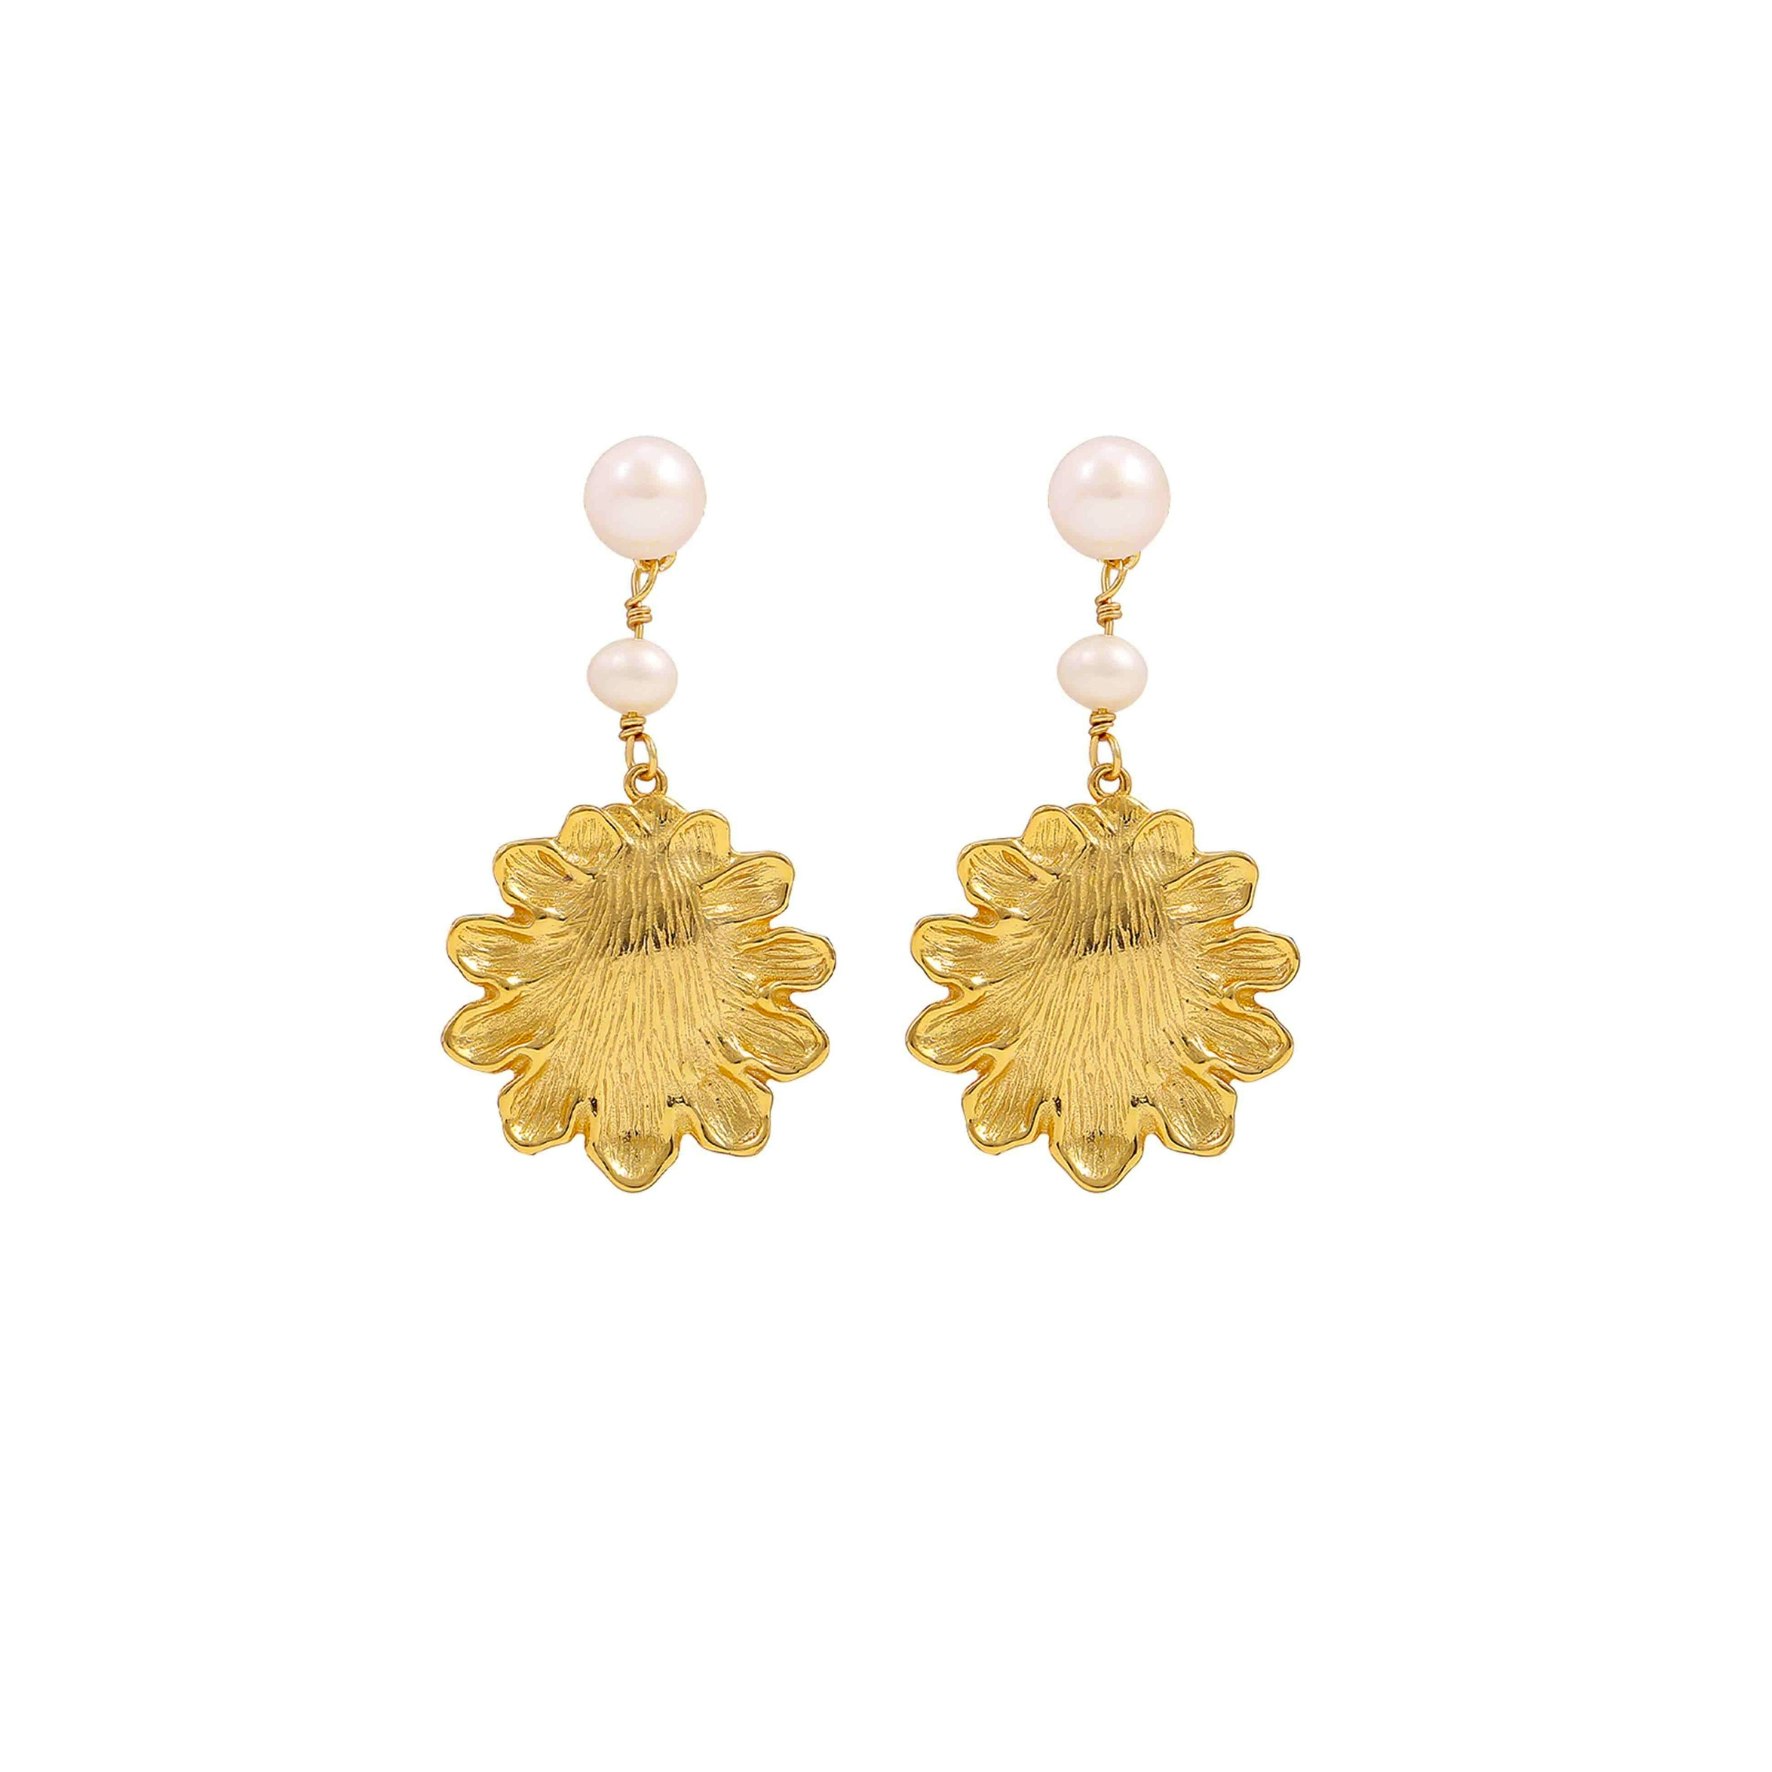 Evelyn Shell Earrings from Hultquist Copenhagen in Goldplated Silver Sterling 925